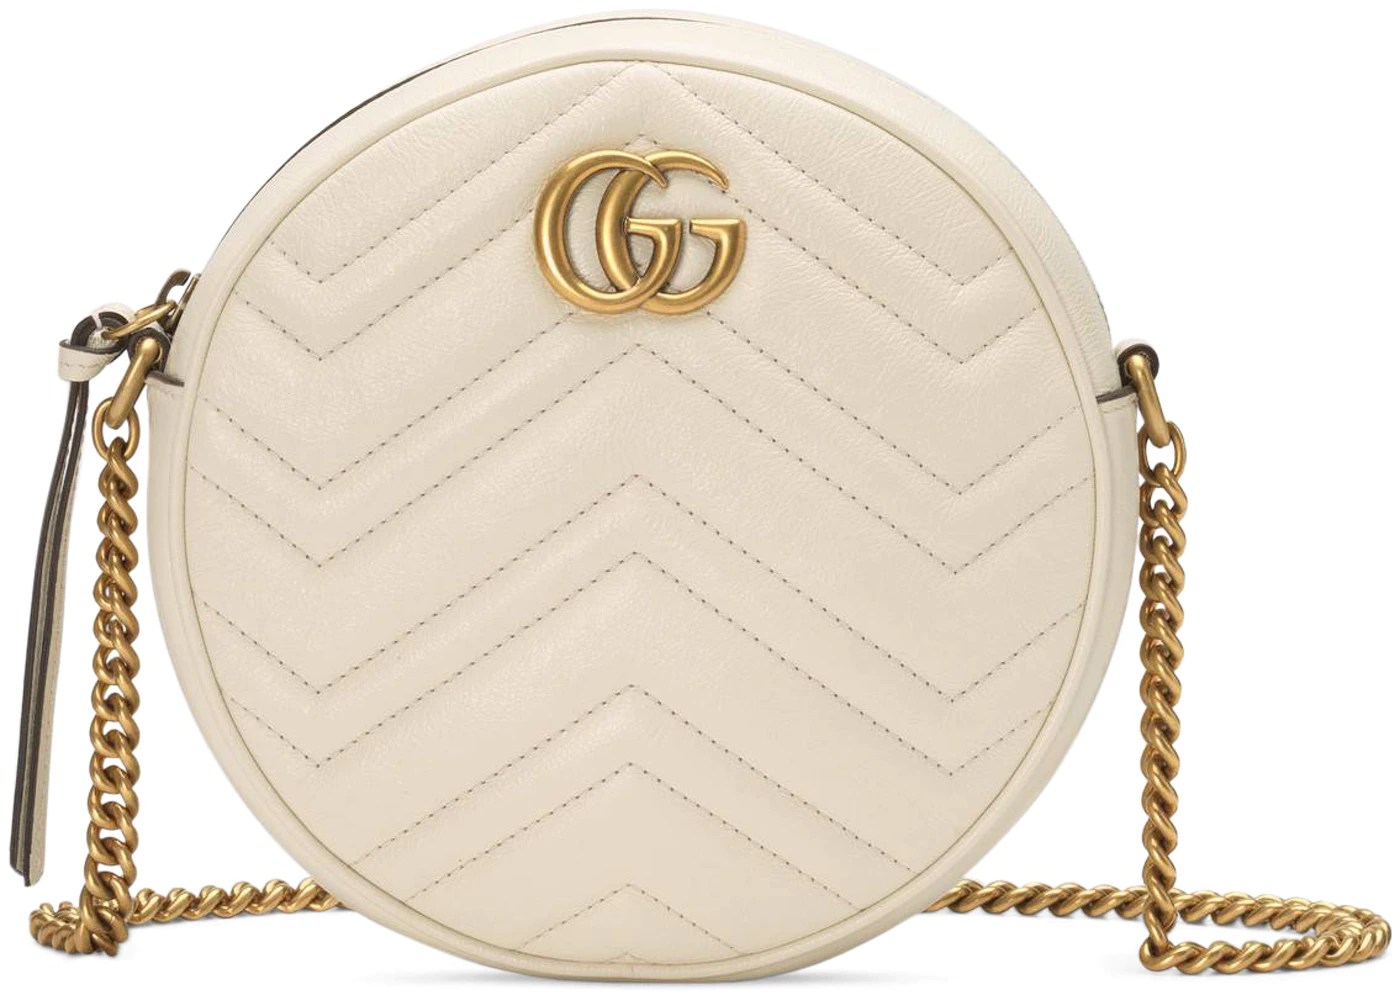 White Gucci Marmont Round-Shoulder Bag Mini | Available on www.gucci.com for ₹1,12,000